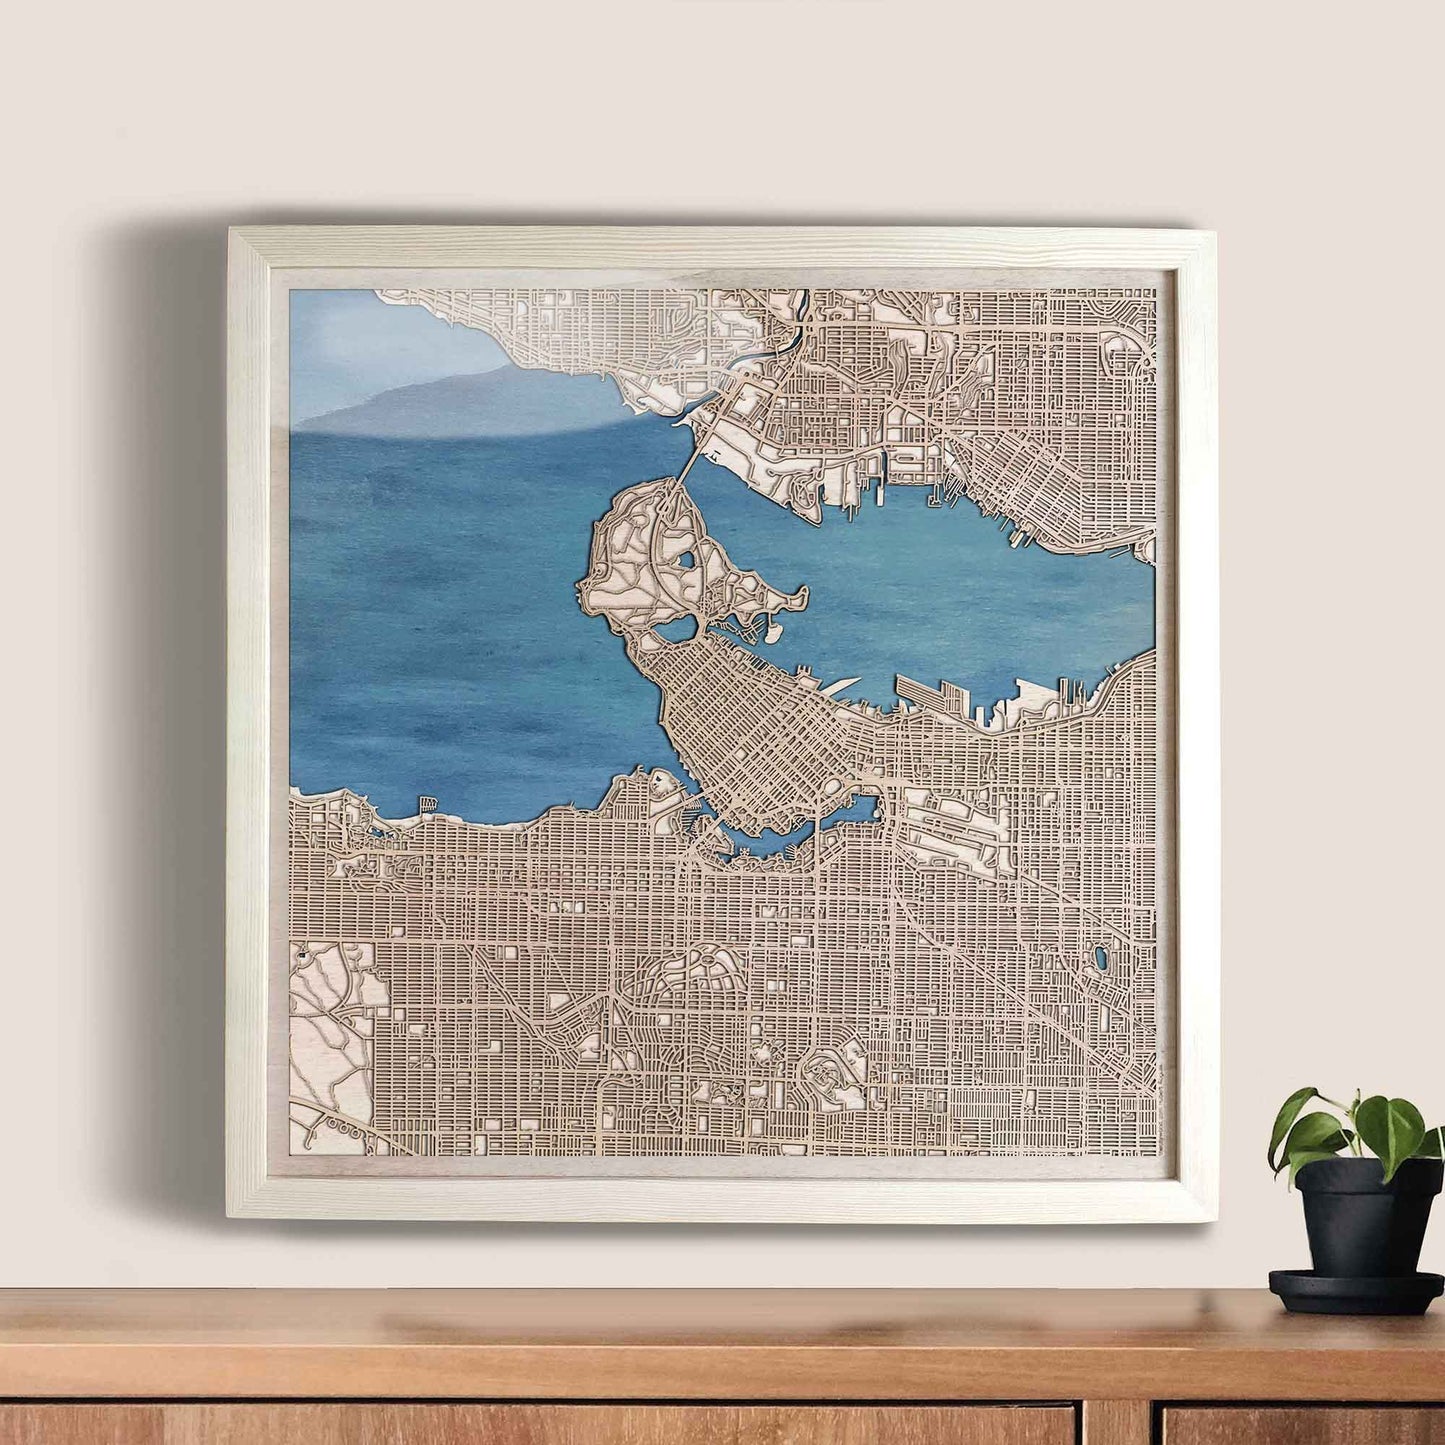 Vancouver Wooden Map by CityWood - Custom Wood Map Art - Unique Laser Cut Engraved - Anniversary Gift